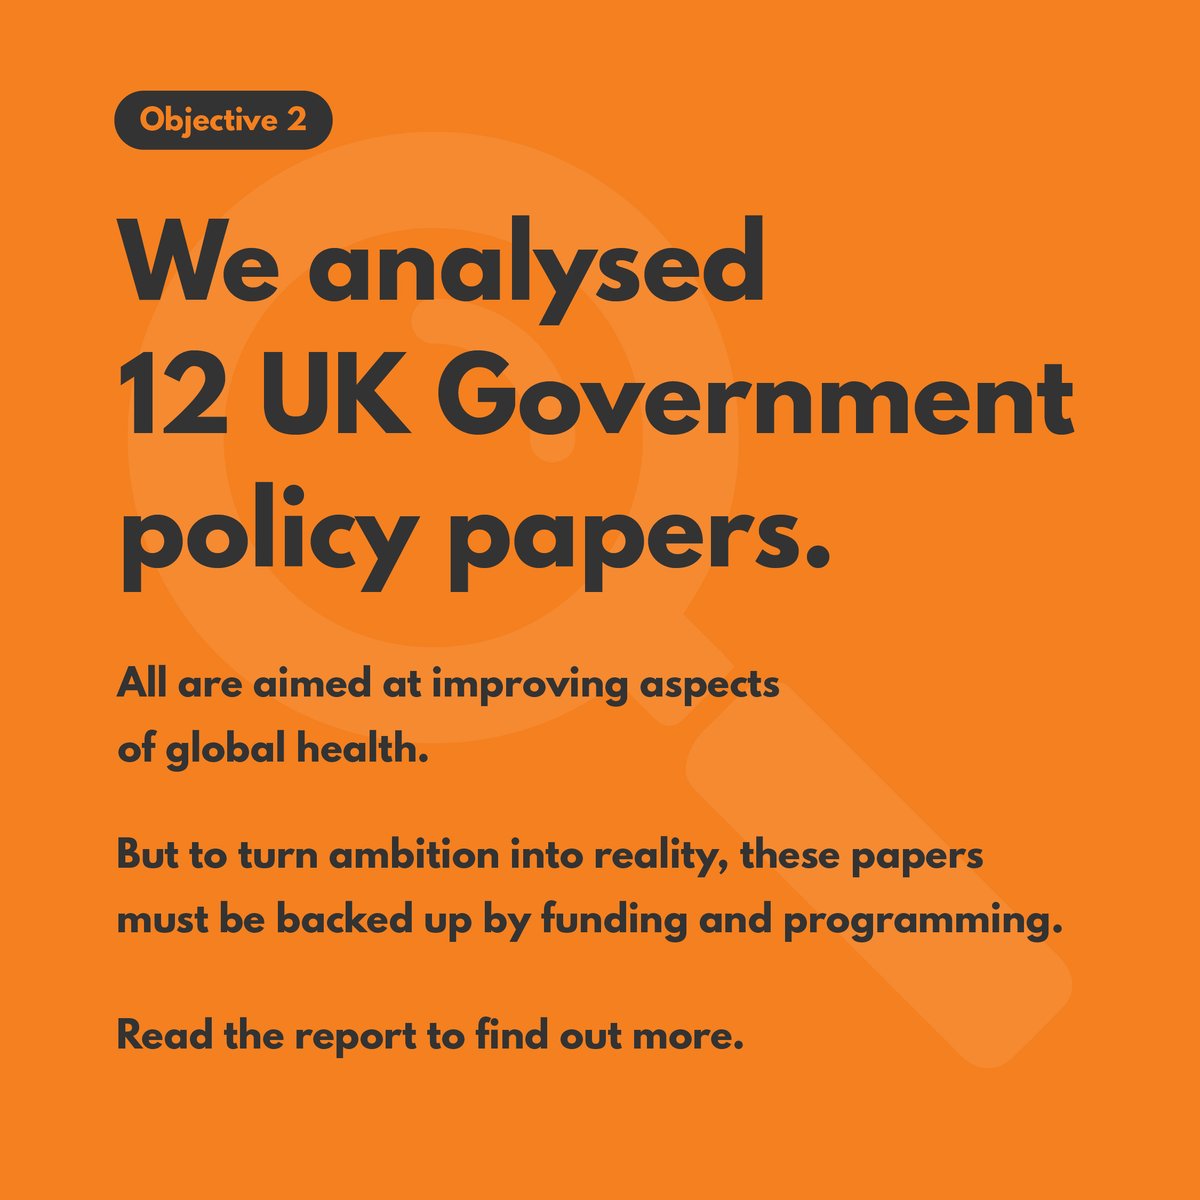 The @AFGHnetwork’s #StocktakeReview provides a snapshot of the UK’s role in global health and a blueprint for achieving #HealthForAll Read the full report 👉bit.ly/4dxed1u